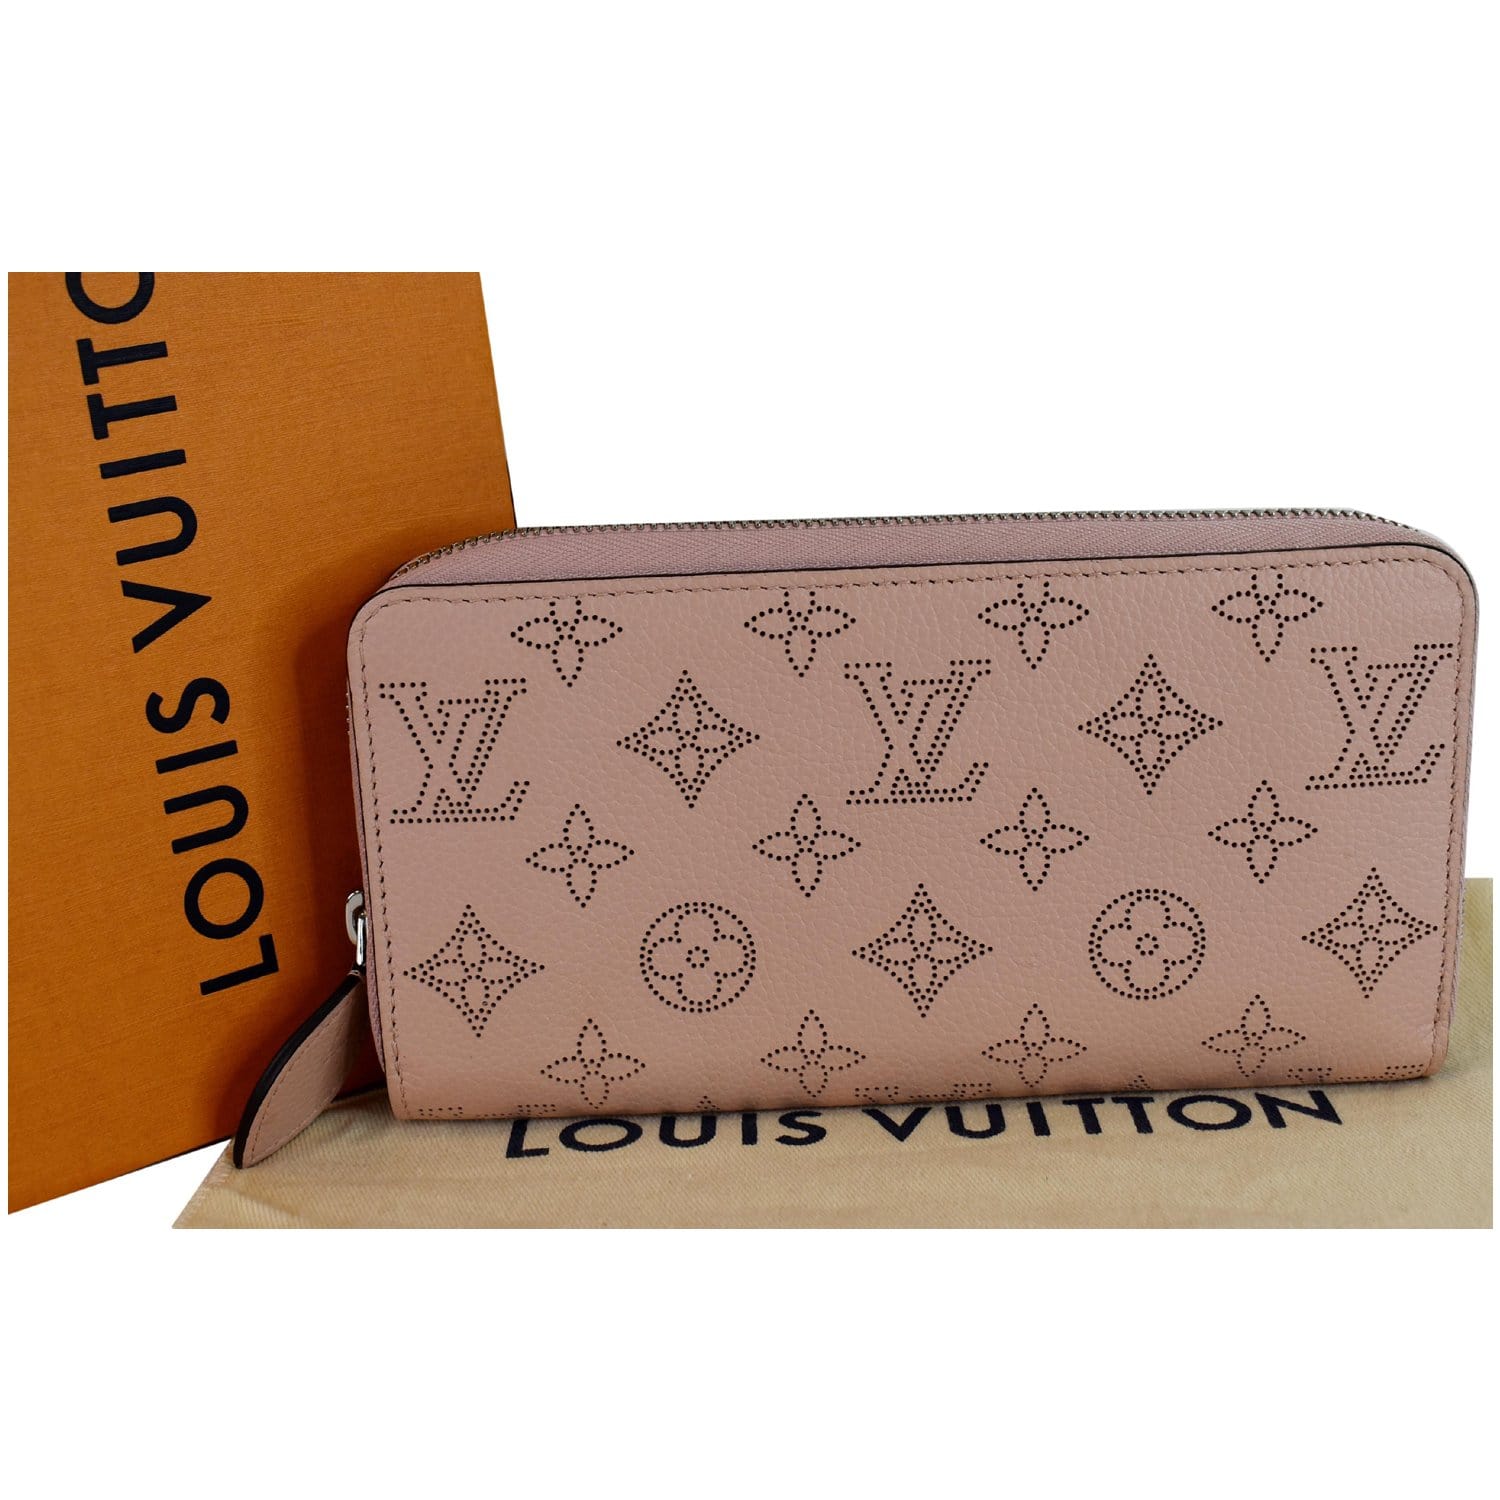 Louis Vuitton - Authenticated Mahina Wallet - Leather Beige for Women, Never Worn